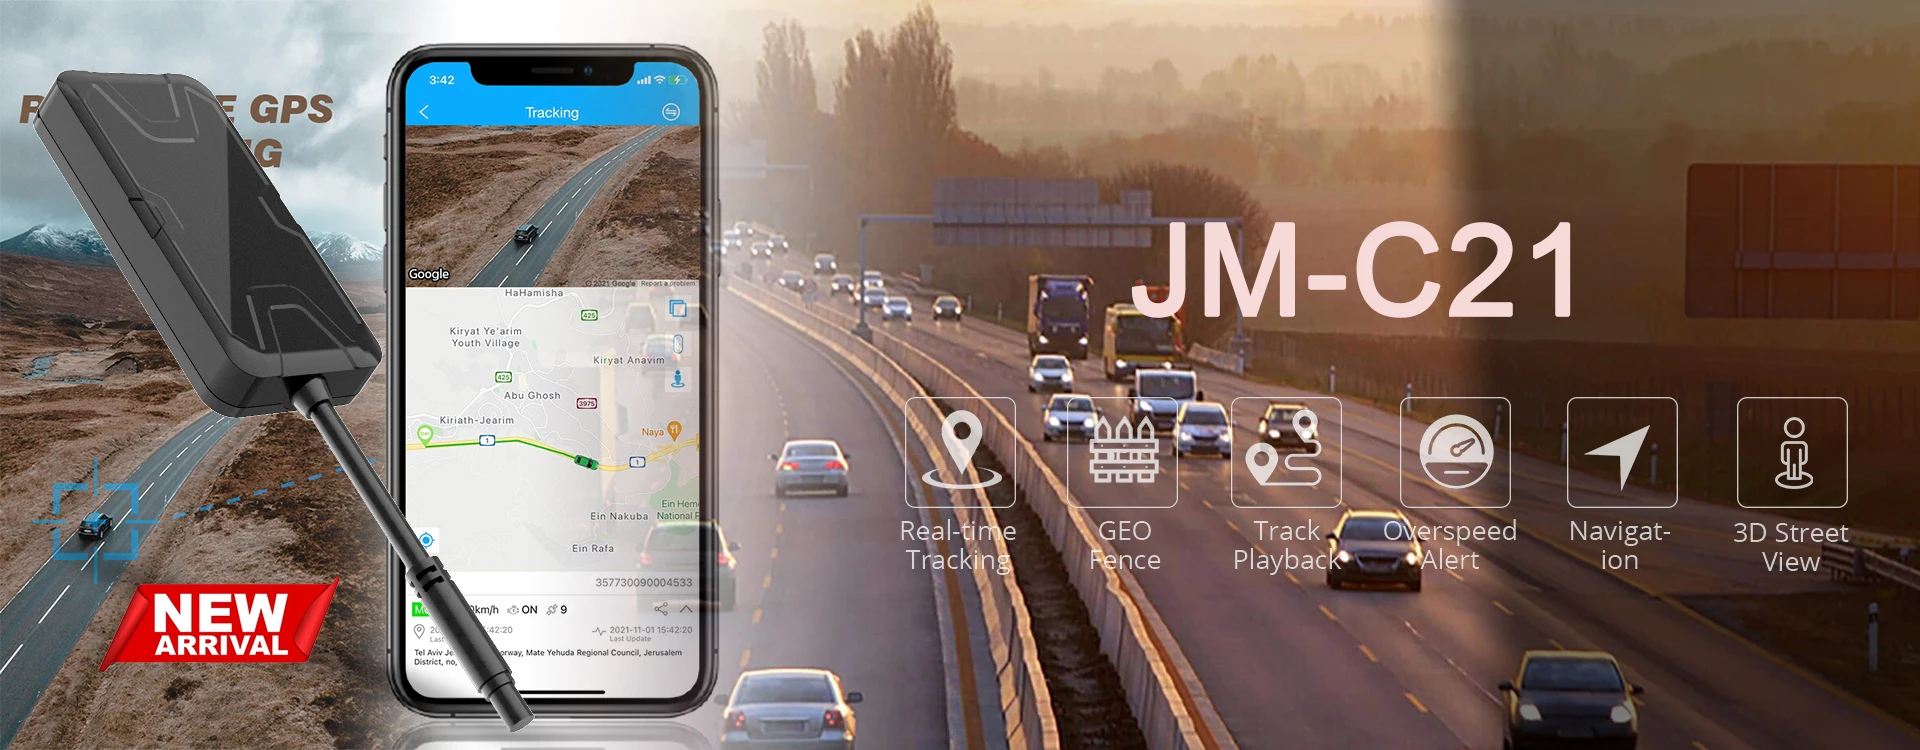 best gps tracker for car GPS Tracking Device JM-C21 Motorcycle Anti-thieft Locator Block Car Remote Tracker With Battery Update Of JV200 Free APP GMS SIM gps tracking device